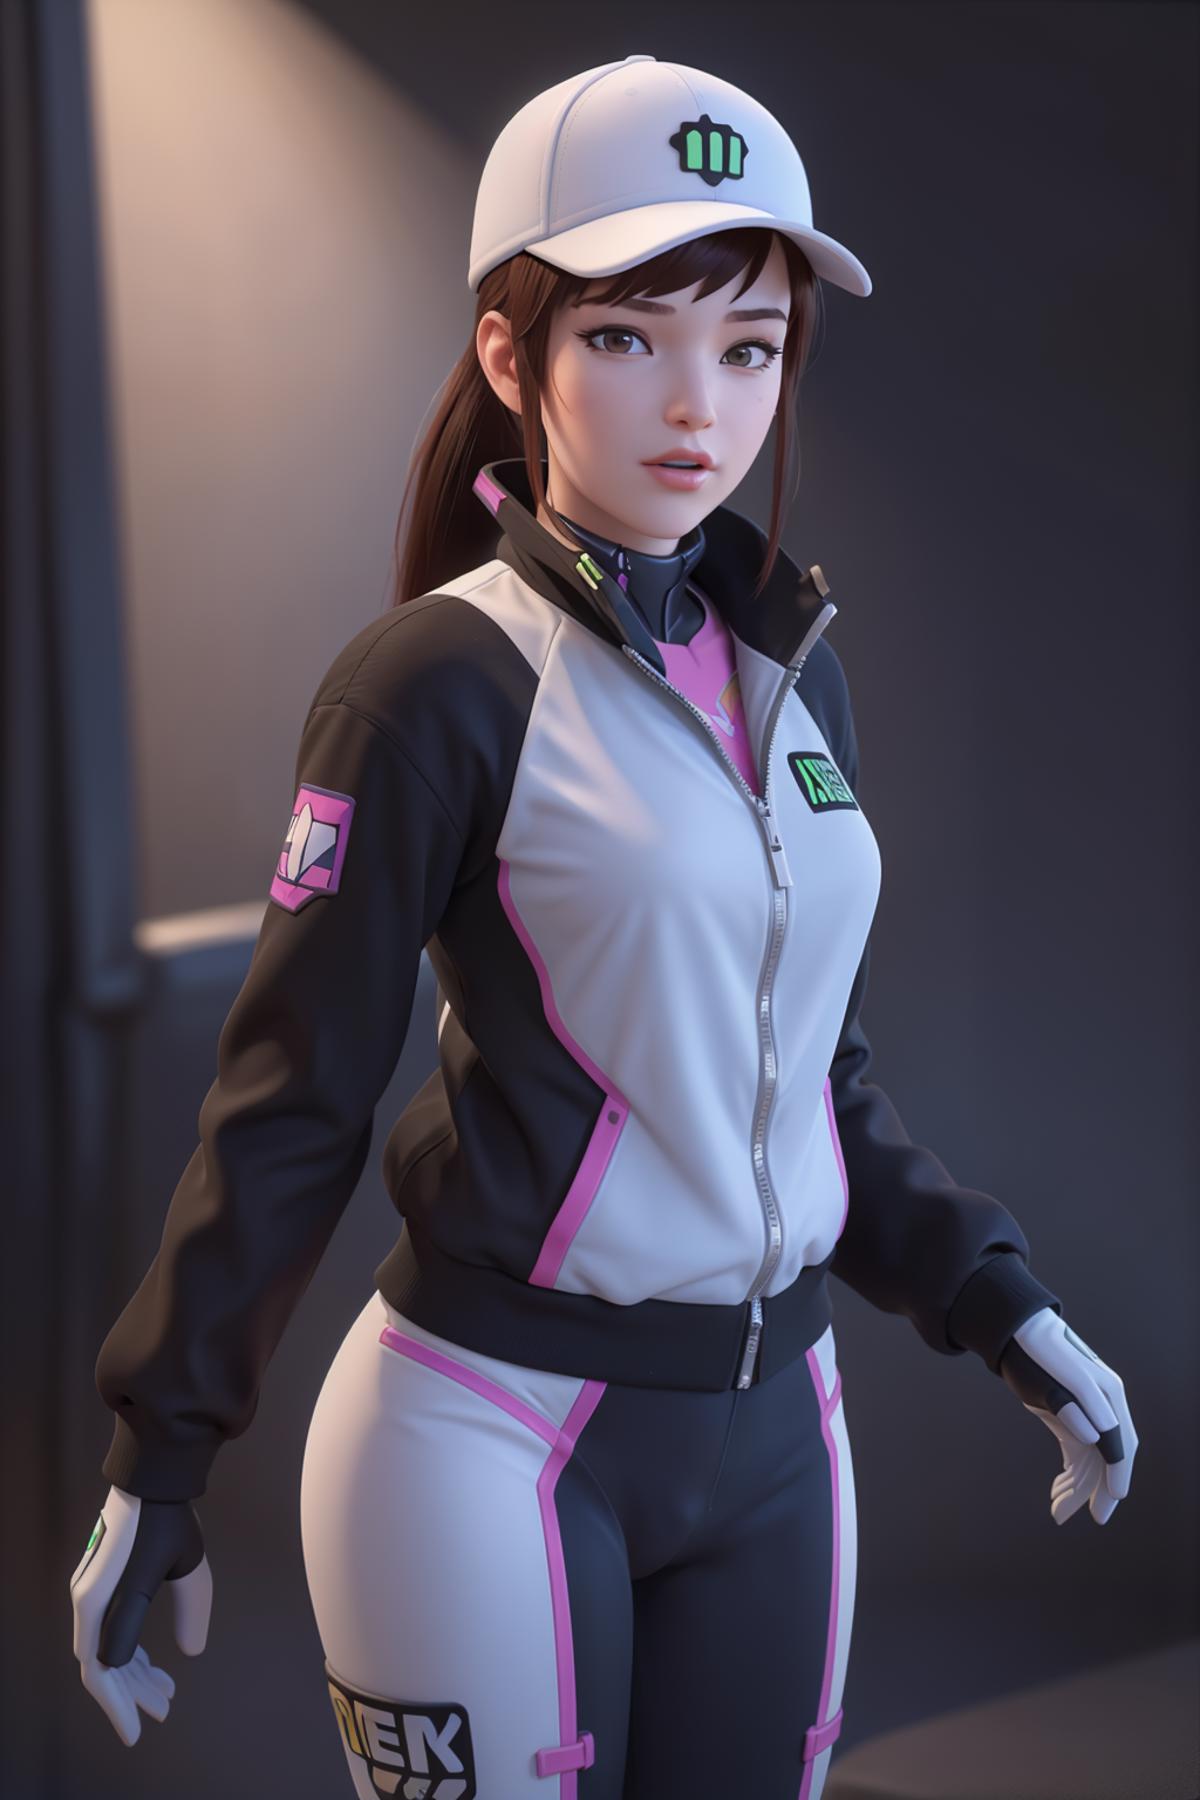 AI model image by shadowrui